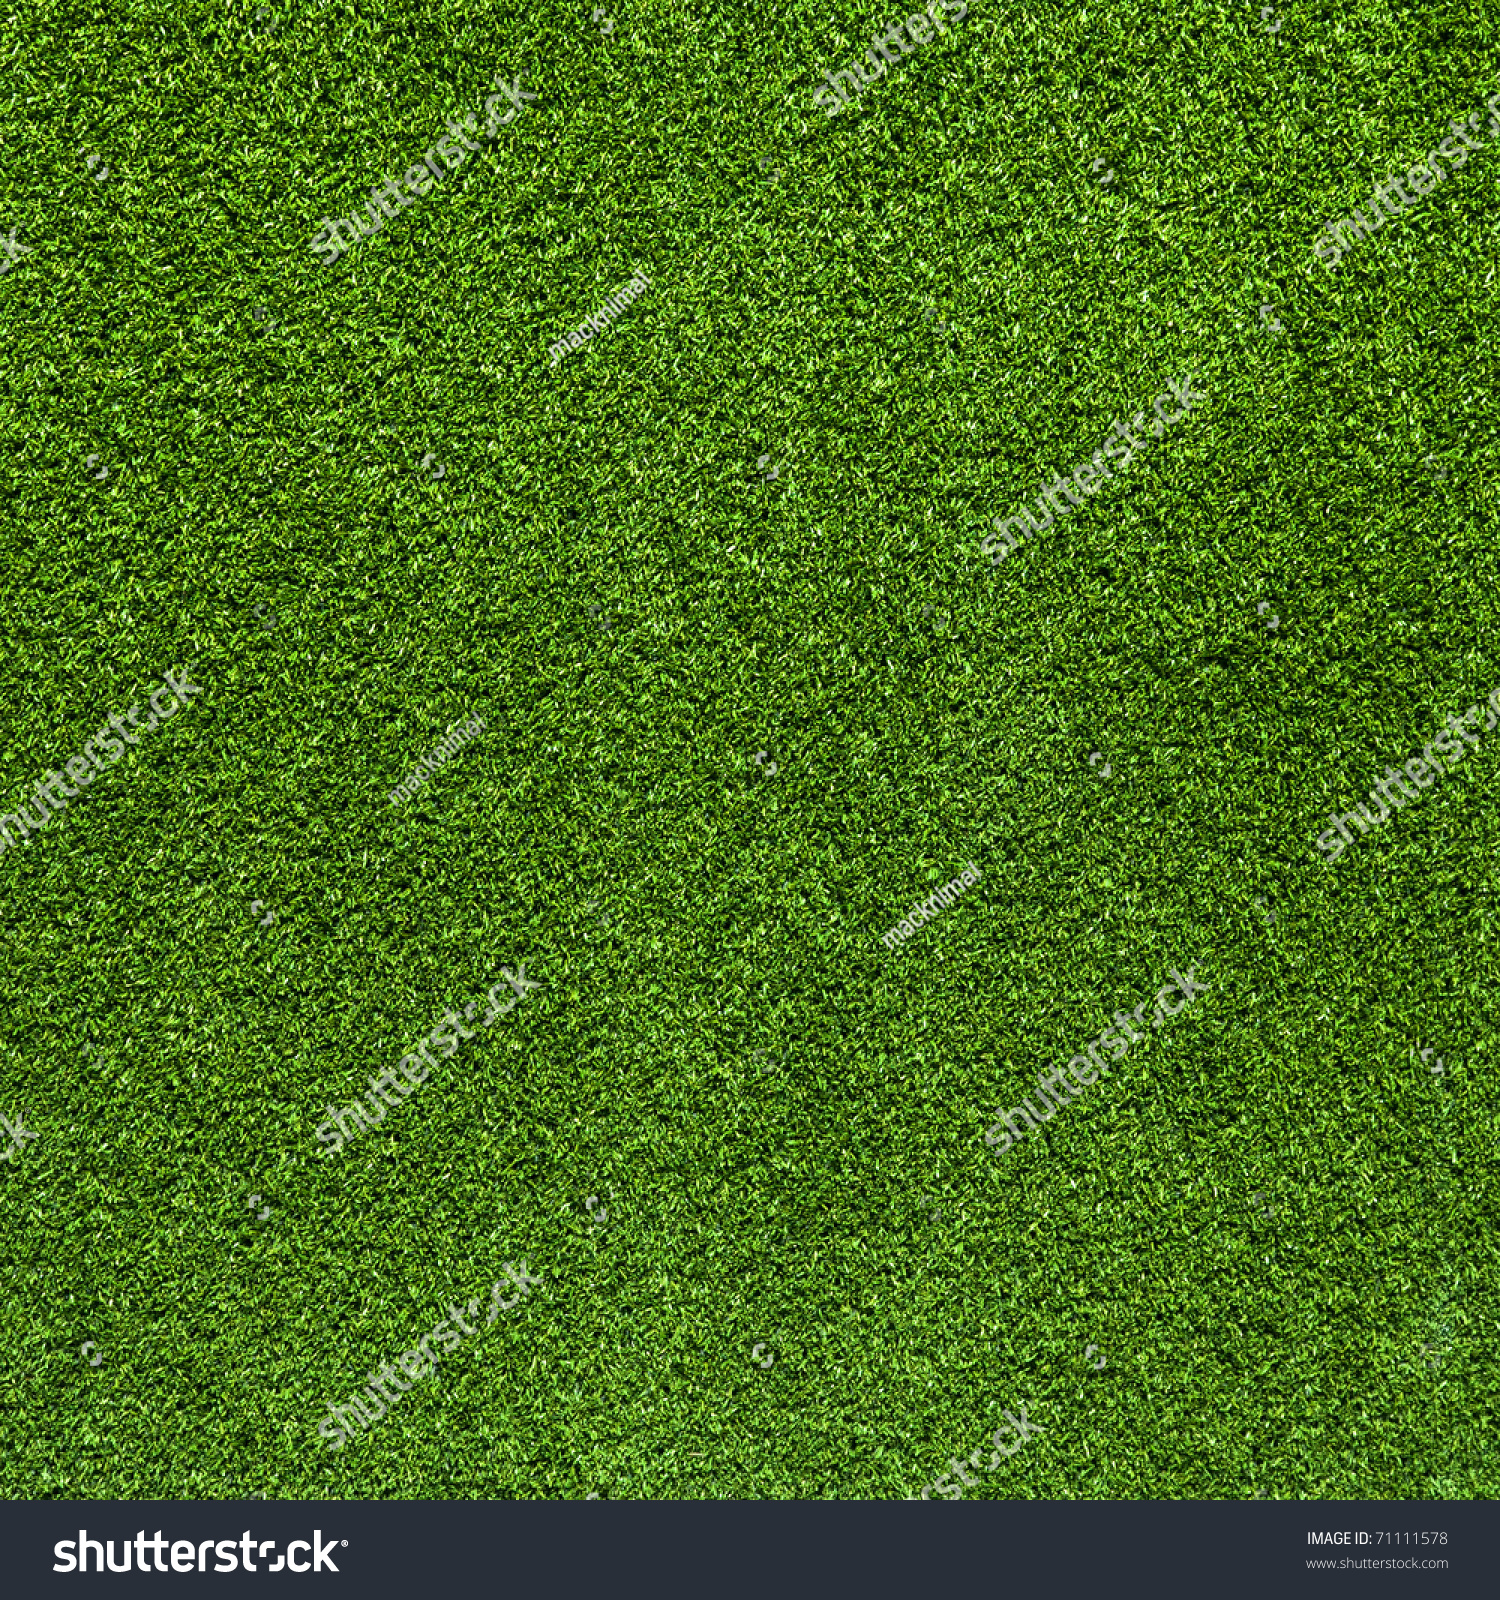 Artificial Grass Background Stock Photo (Royalty Free) 71111578 ...